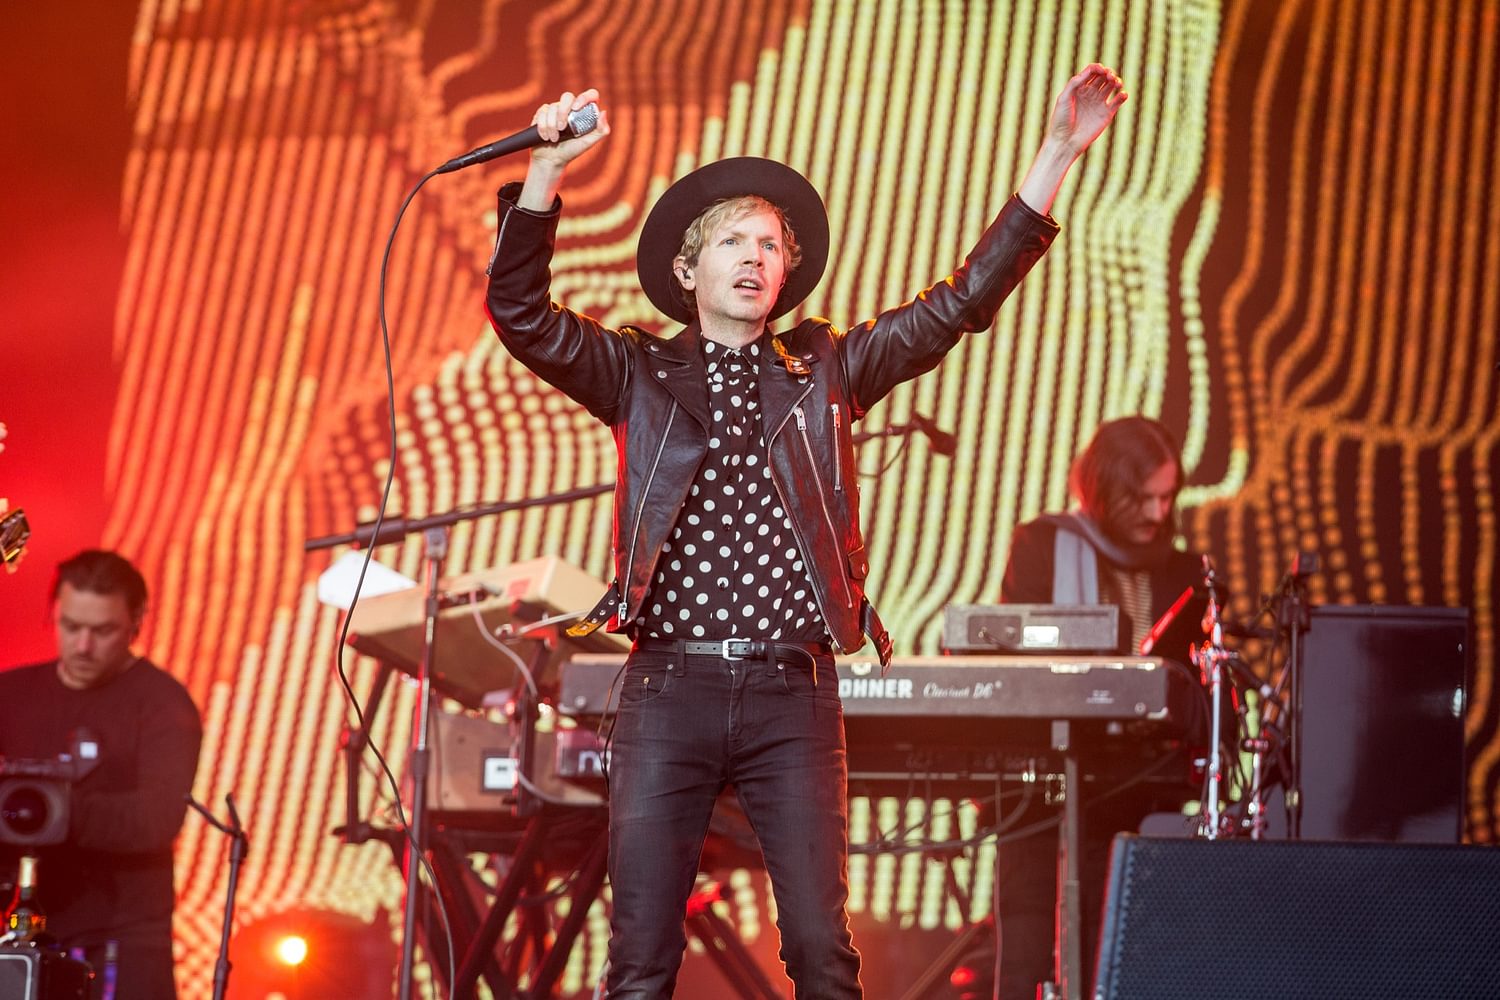 So, is Beck’s new album coming out in October?